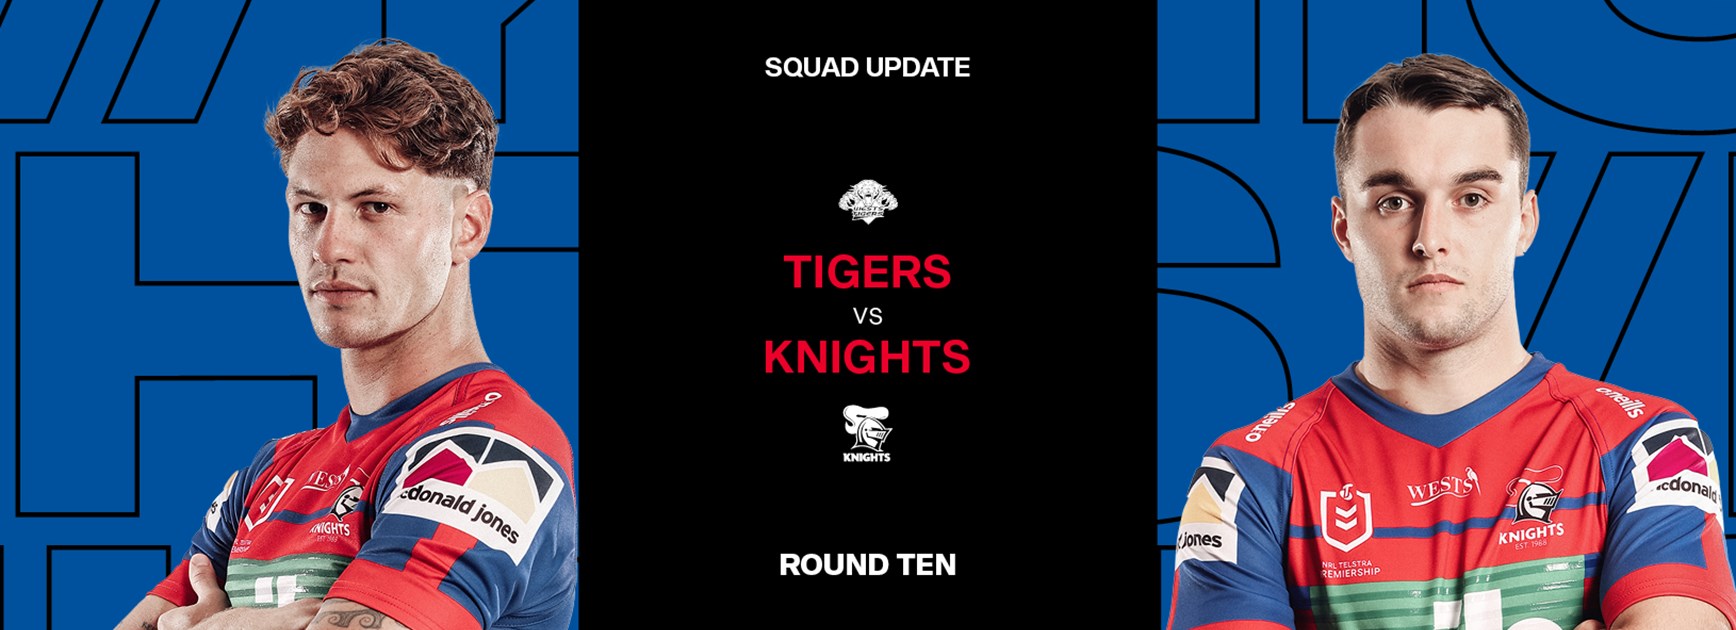 Squad Update: Changes confirmed for Magic Round